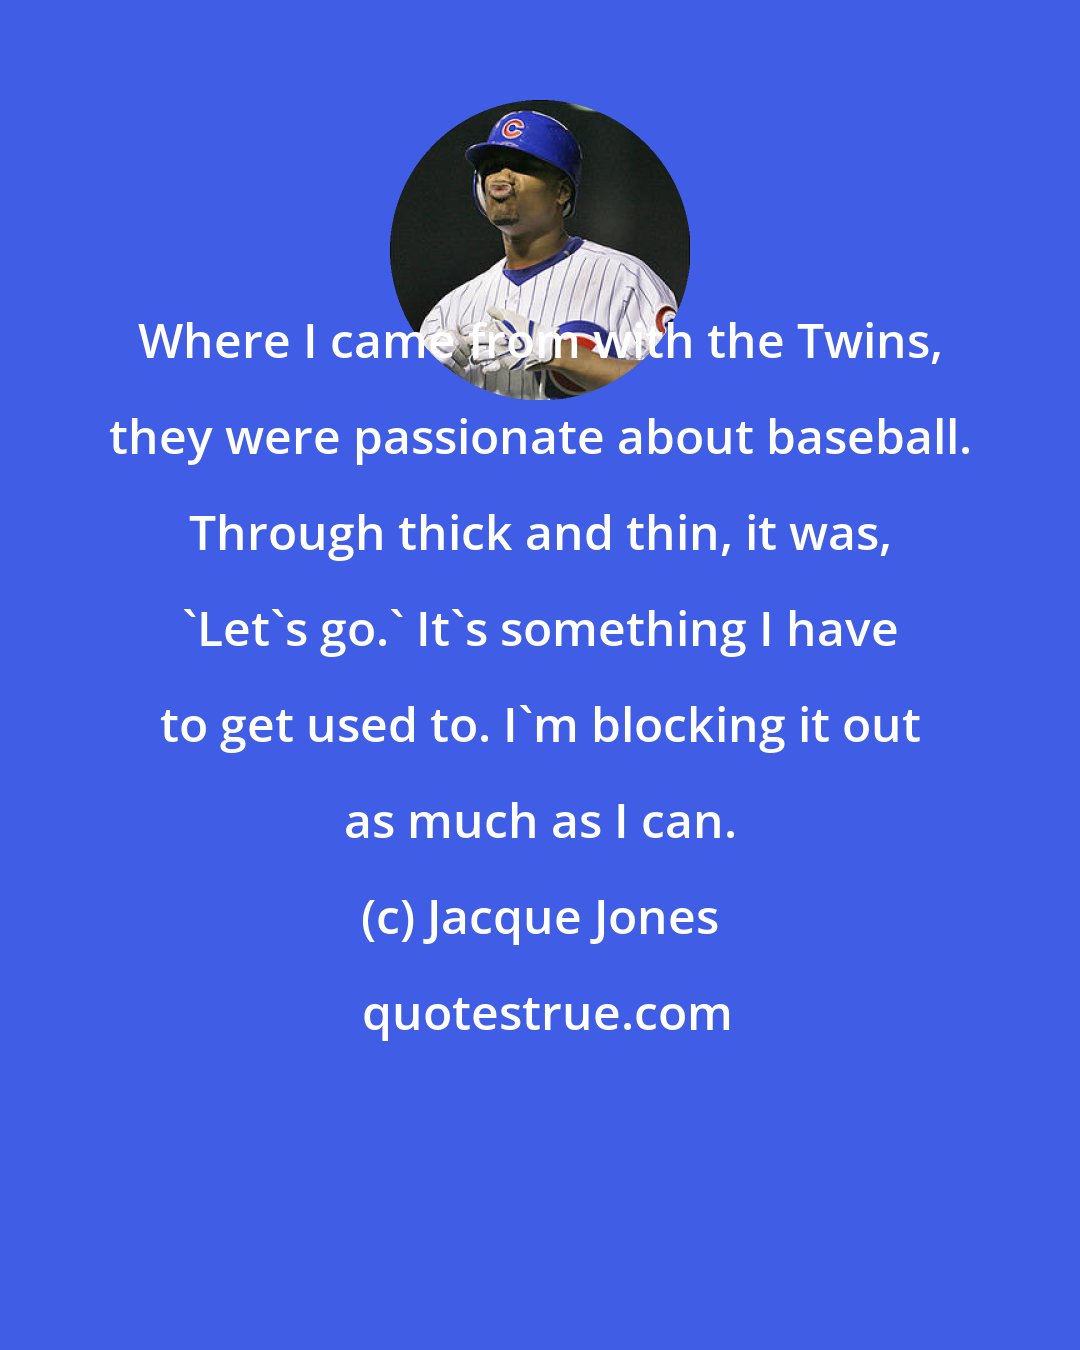 Jacque Jones: Where I came from with the Twins, they were passionate about baseball. Through thick and thin, it was, 'Let's go.' It's something I have to get used to. I'm blocking it out as much as I can.